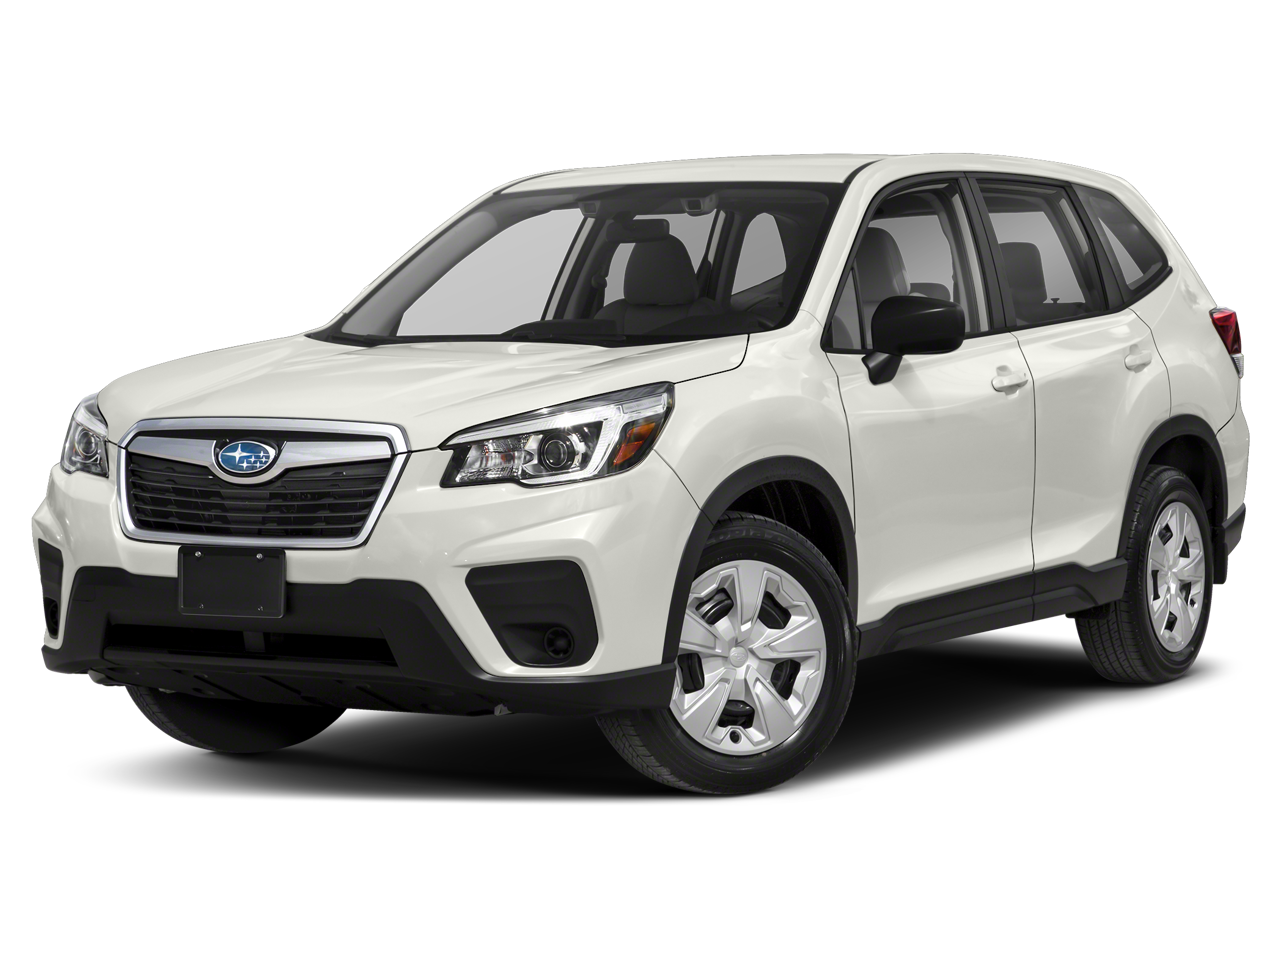 2019 Subaru Forester Premium Option Package: 14 All-Weather Package: